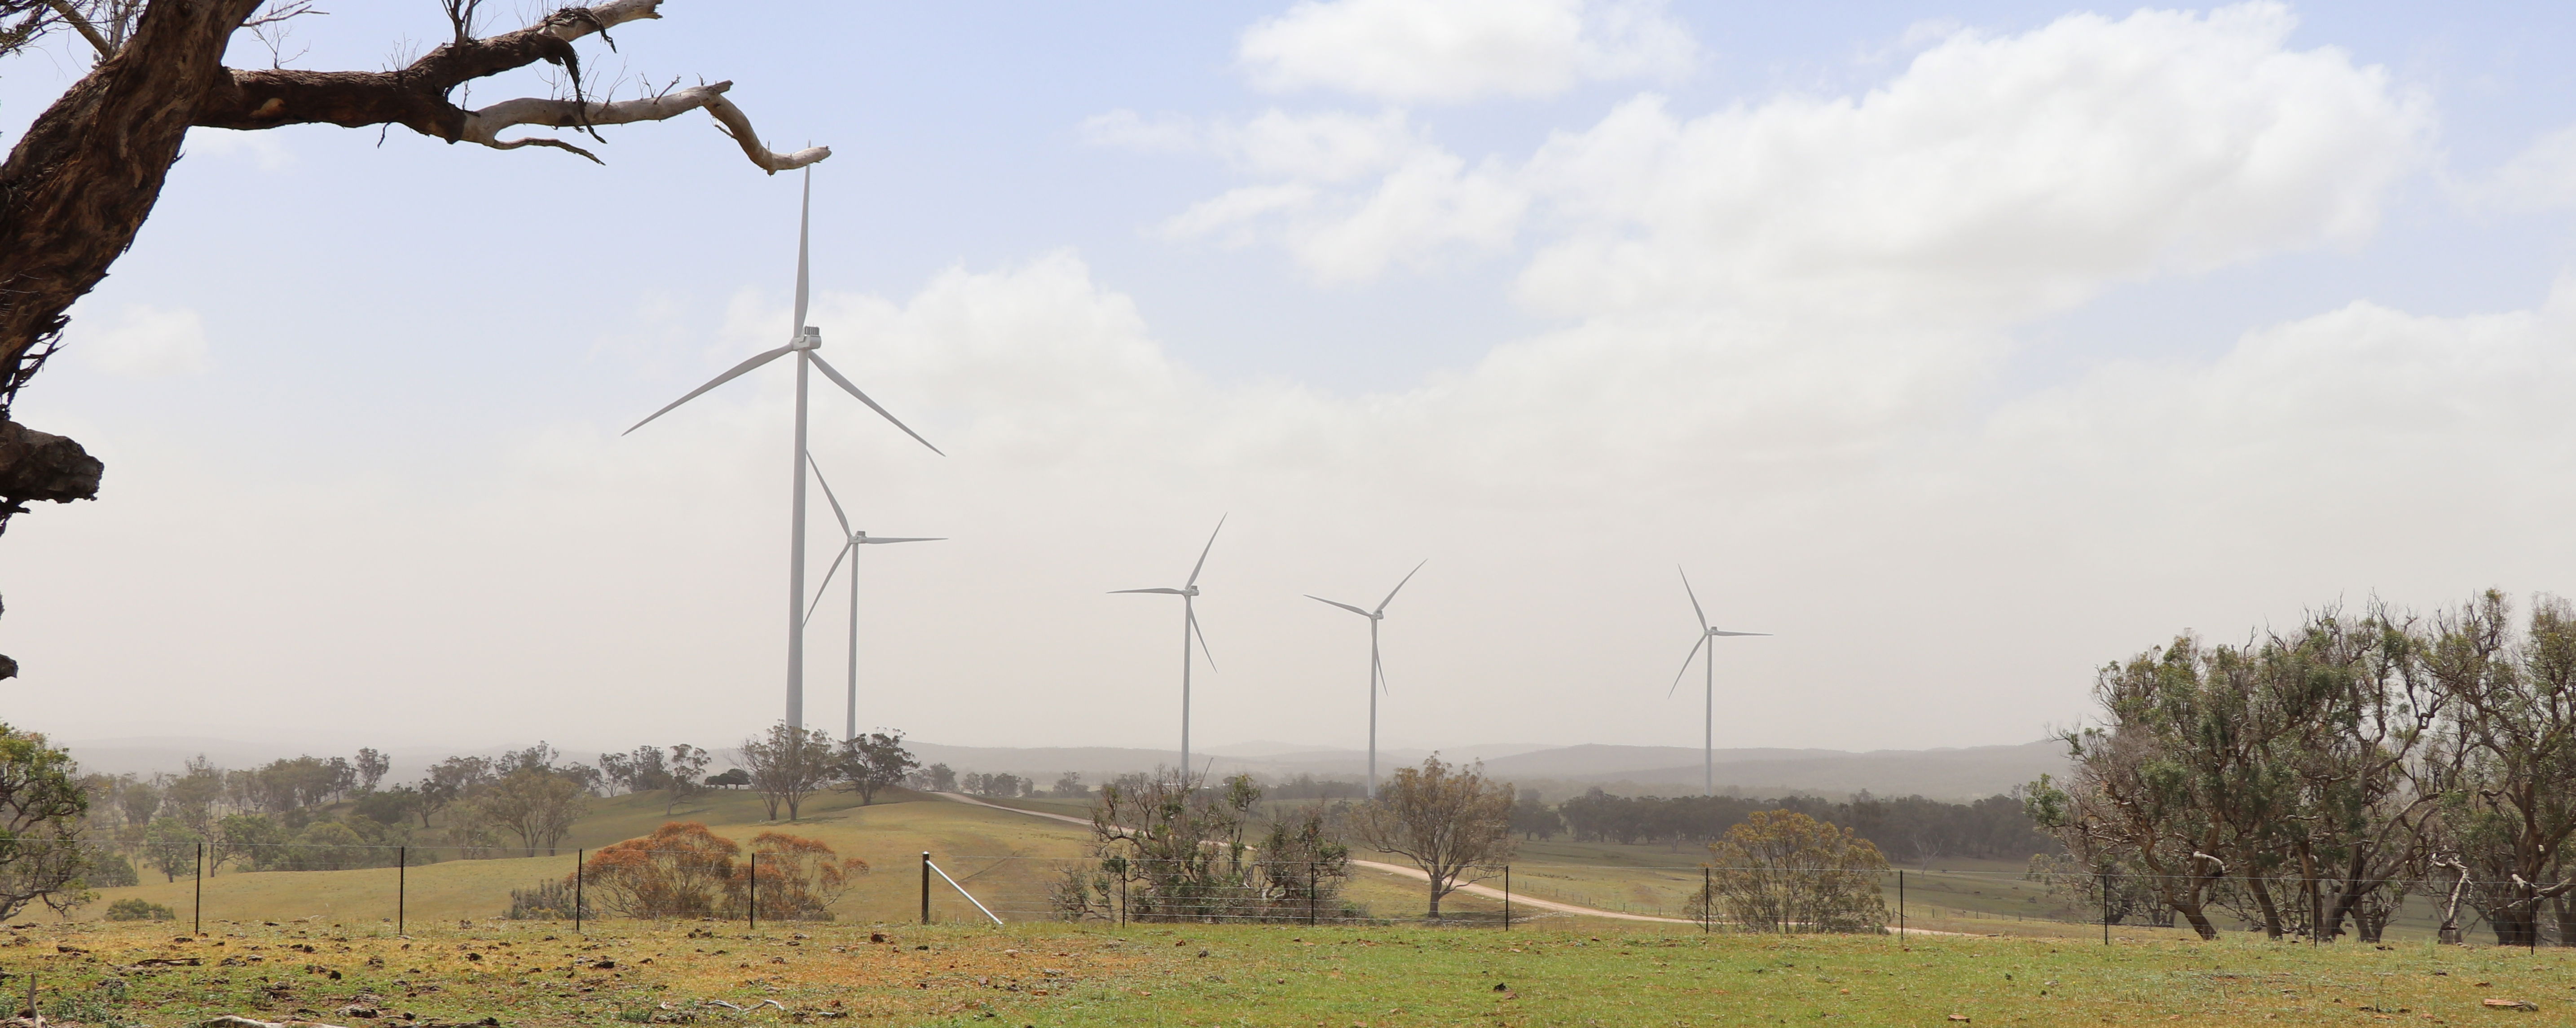 Sapphire Wind Farm adds sparkle to renewables sector